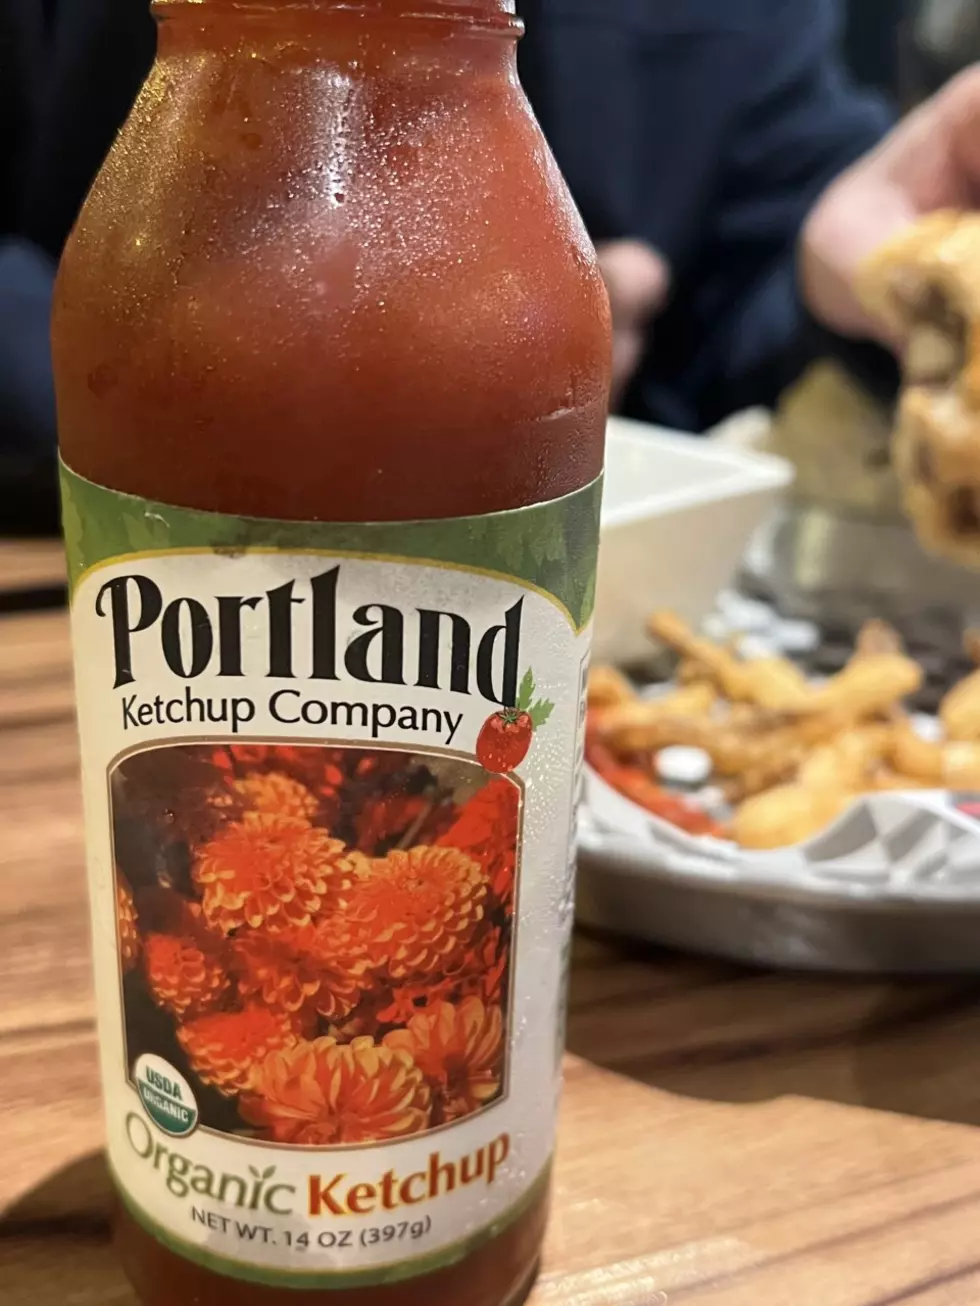 Say What? Have You Ever Experienced Portland’s Popular Ketchup?